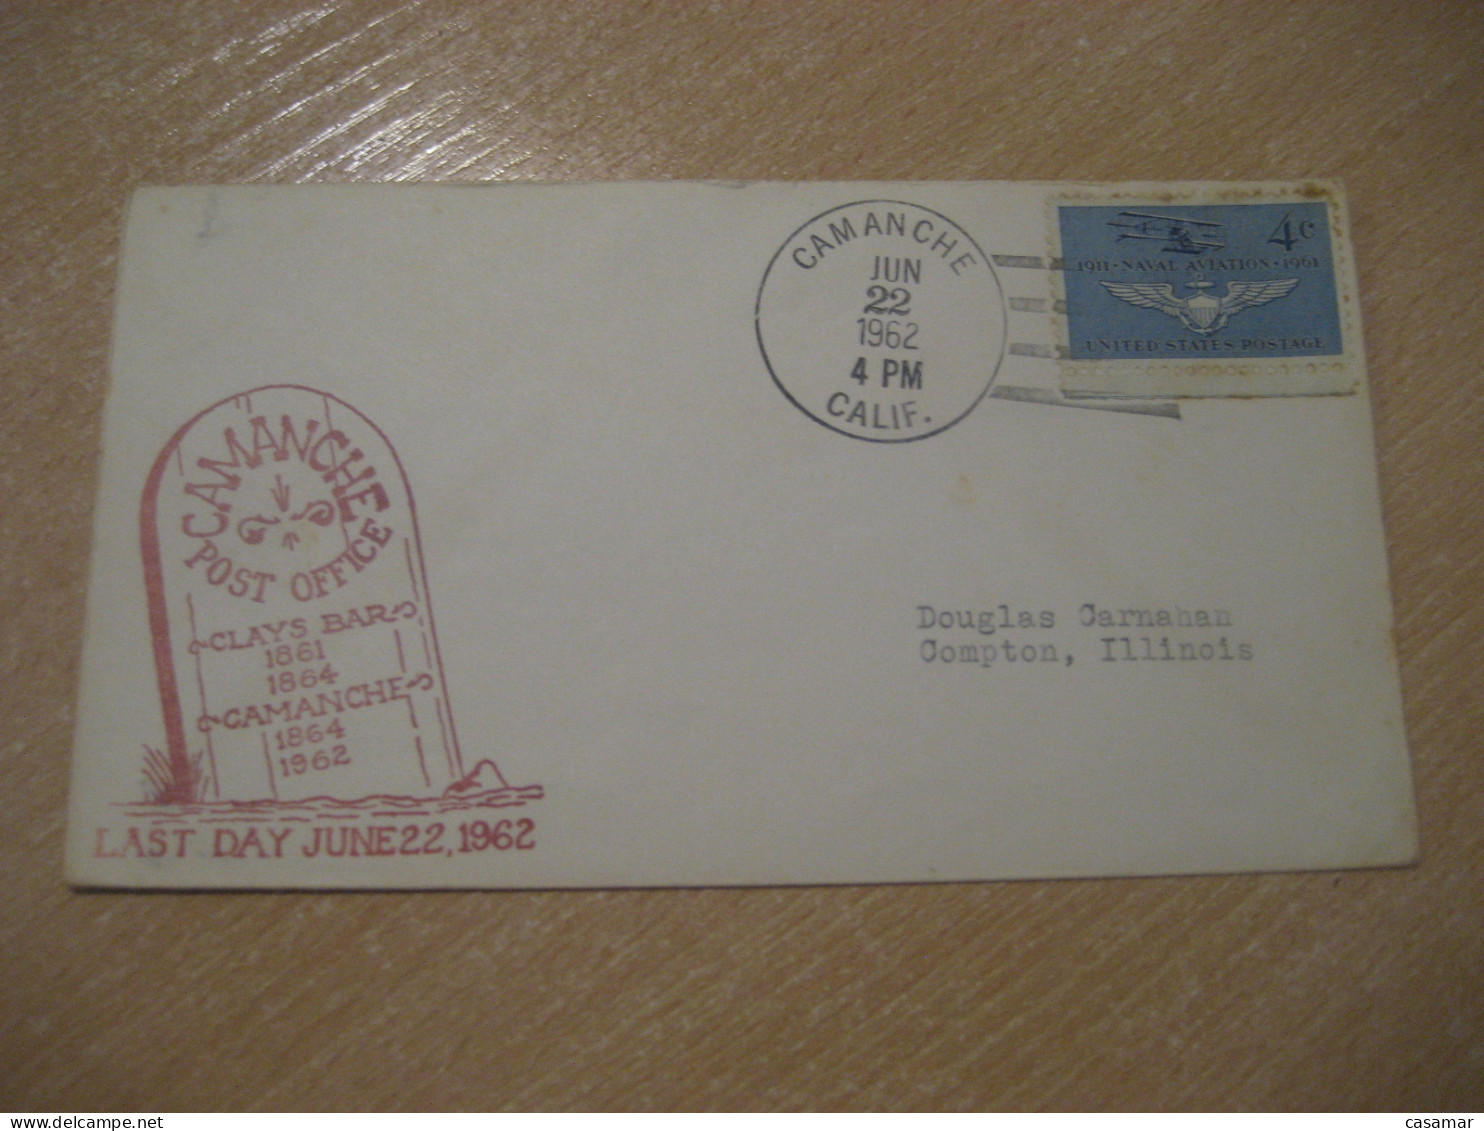 CAMANCHE 1962 Post Office Clays Bar Last Day American Indians Indian Cancel Cover USA Indigenous Native History - American Indians